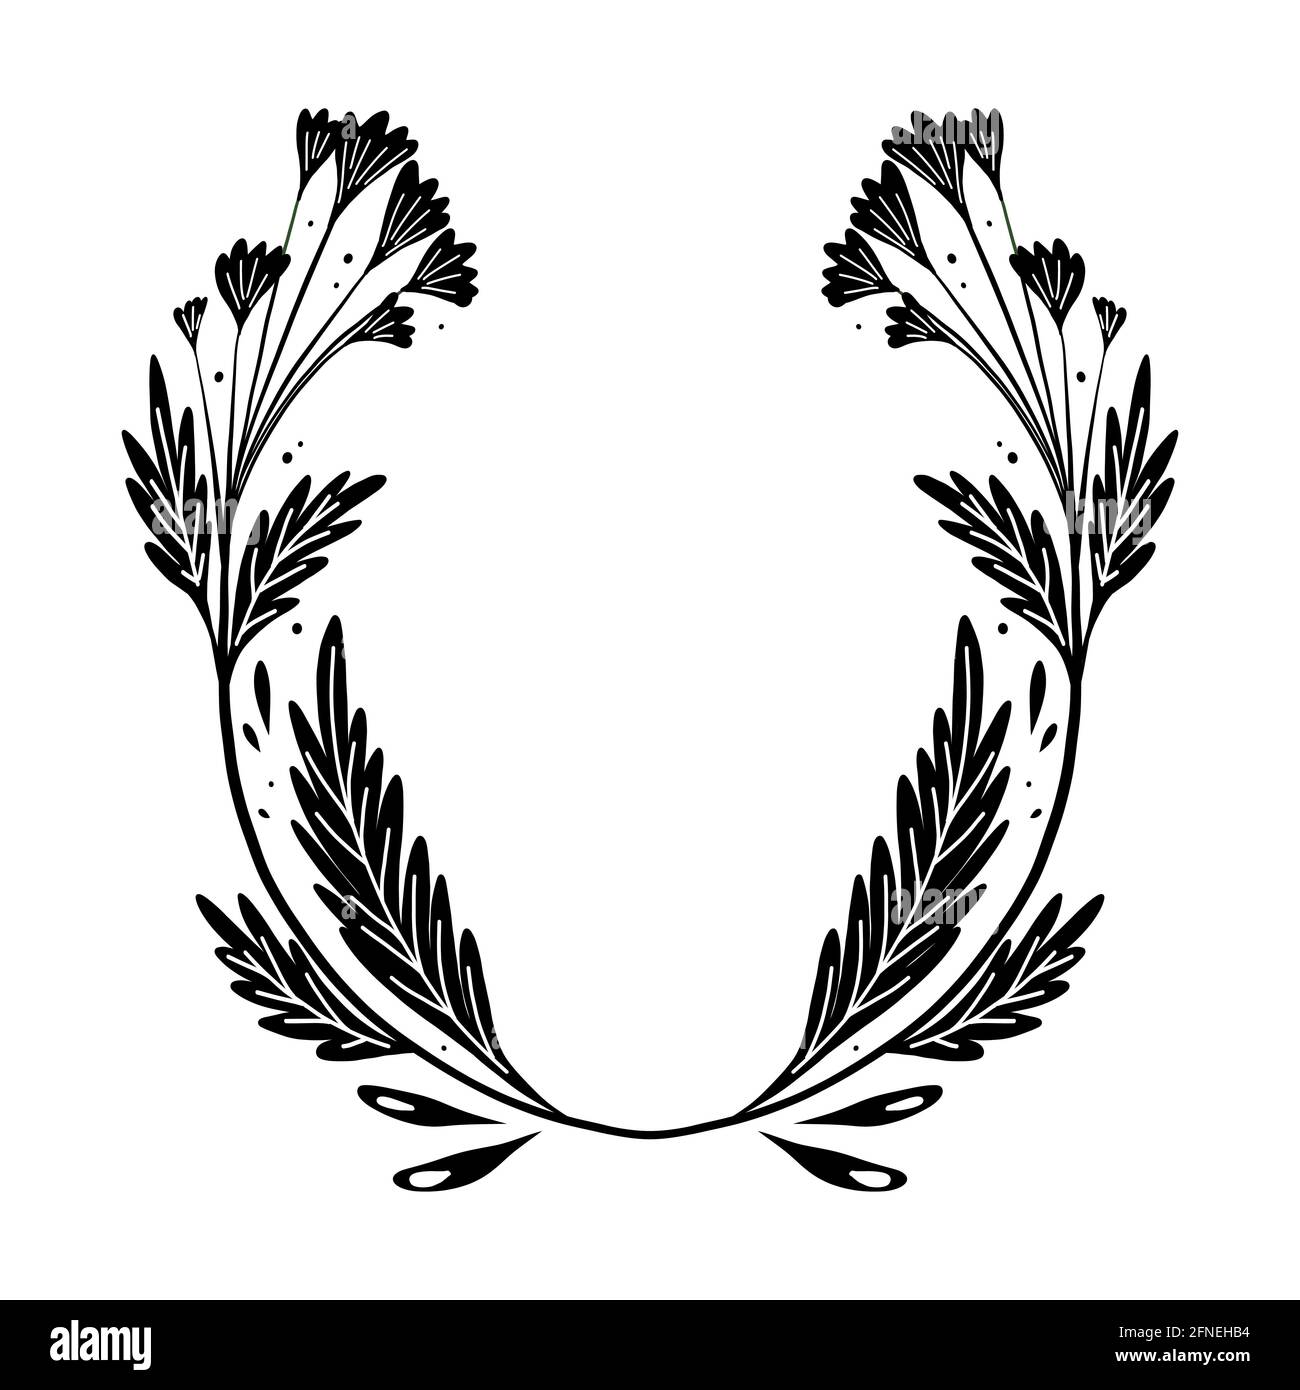 Black silhouette of frame with natural herbs and flowers of the fields. Wreath with buttercups and foliage. Print of branches of plants. Stems and pet Stock Vector